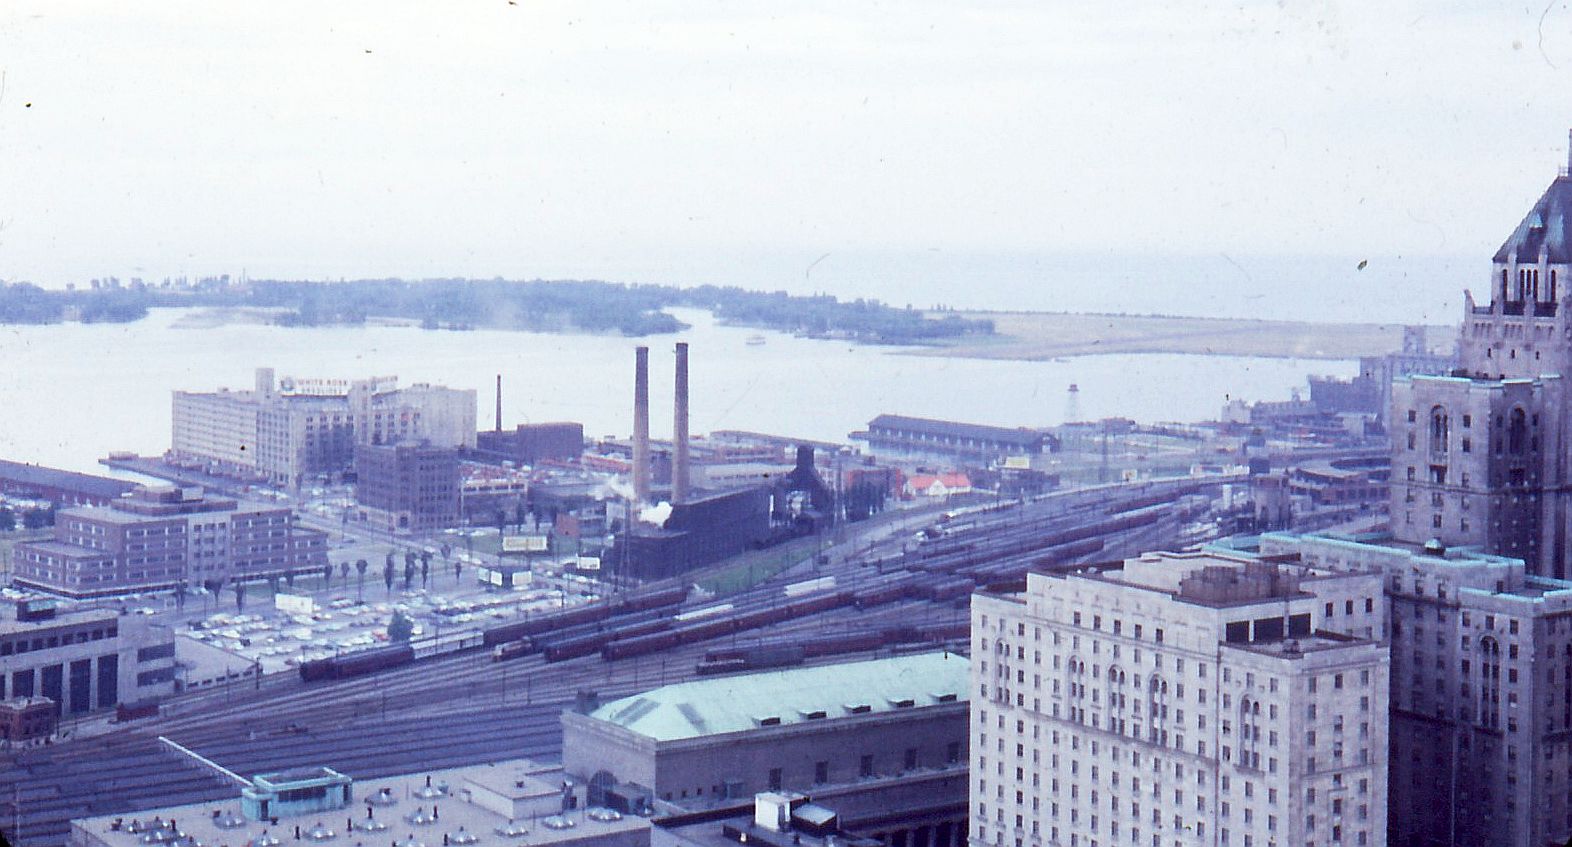 waterfront south from Star Builing 1957.jpg